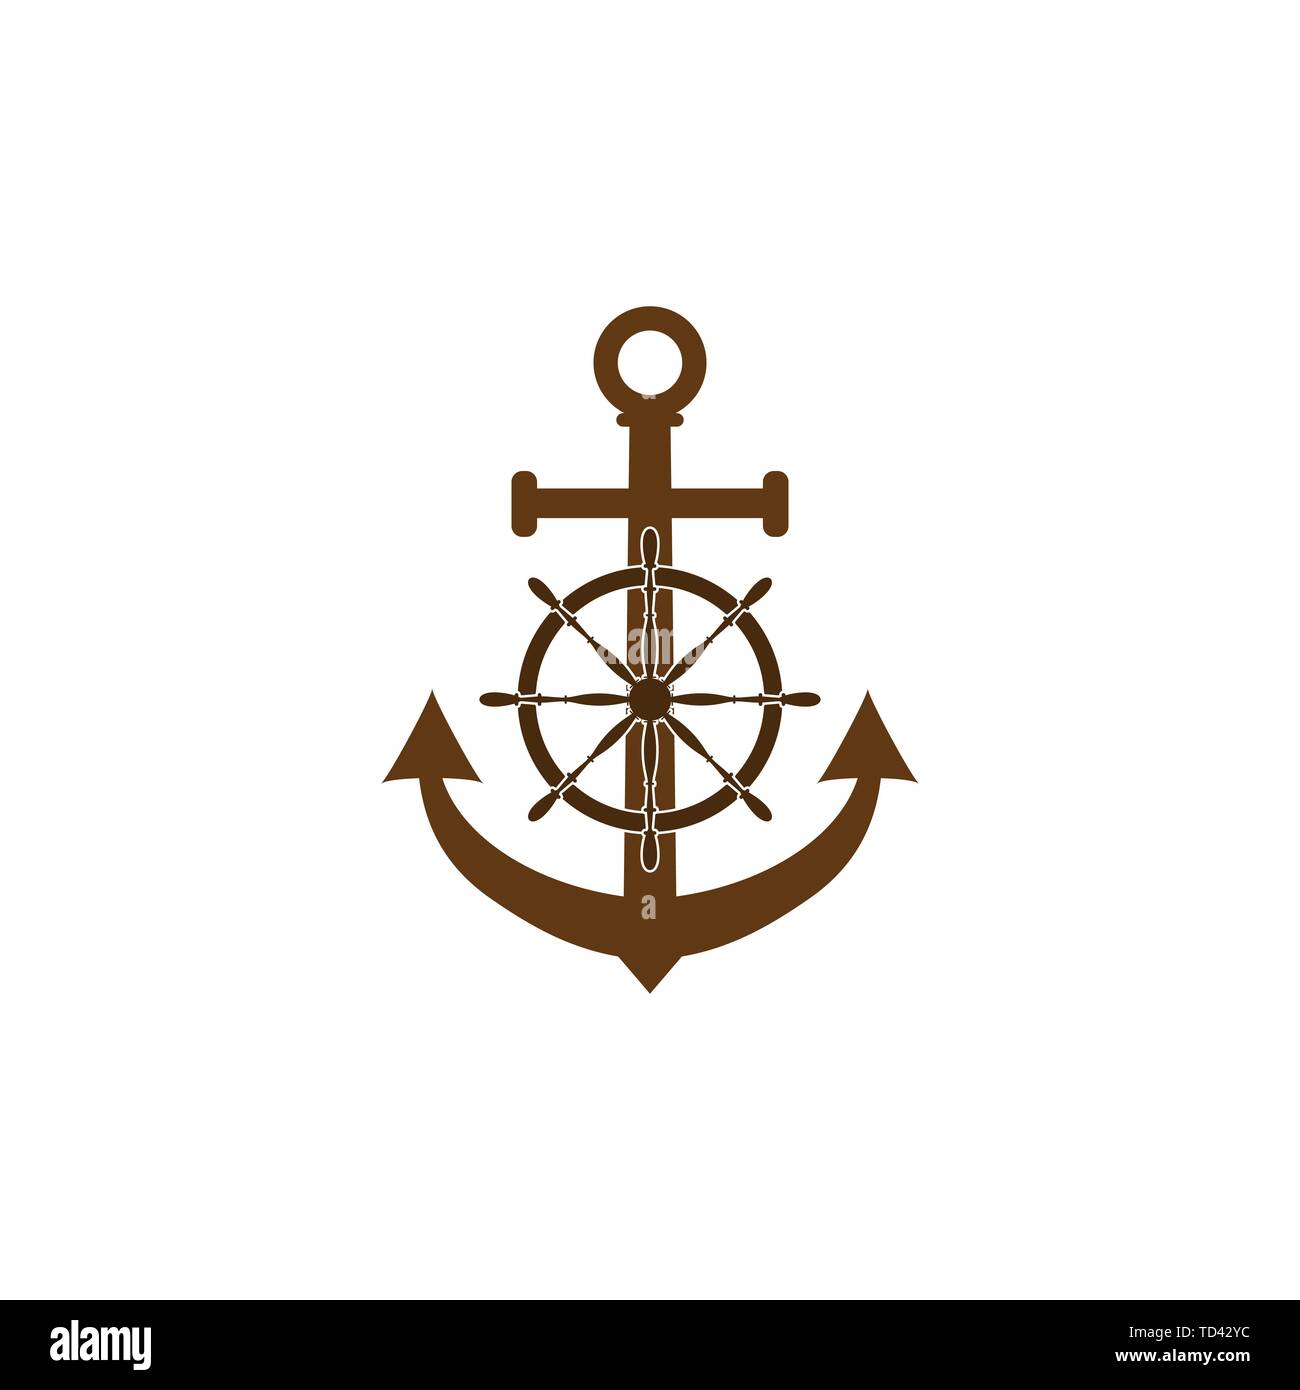 Maritime tattoo template black white anchor steering wheel Vectors graphic  art designs in editable ai eps svg cdr format free and easy download  unlimit id6851196